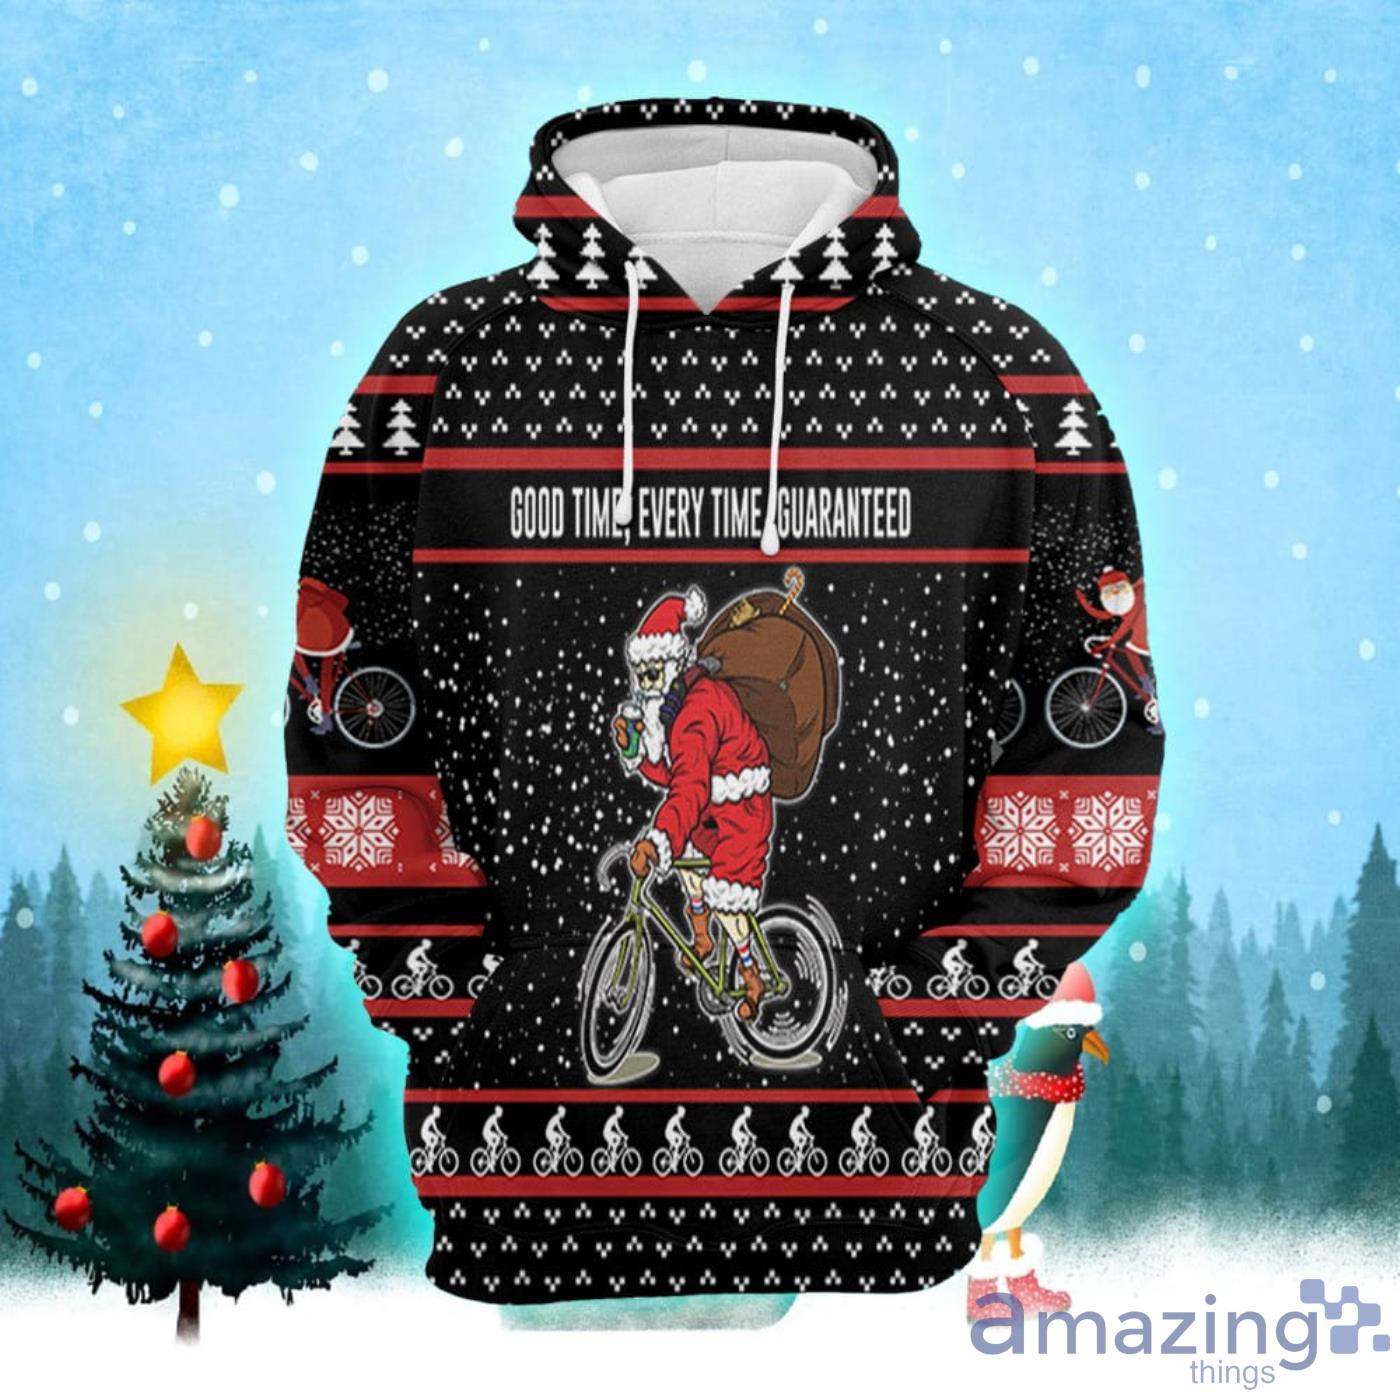 Good Time Every Time Guaranteed Santa Claus Christmas Pattern All Over Print 3D Sweater Hoodie Product Photo 1